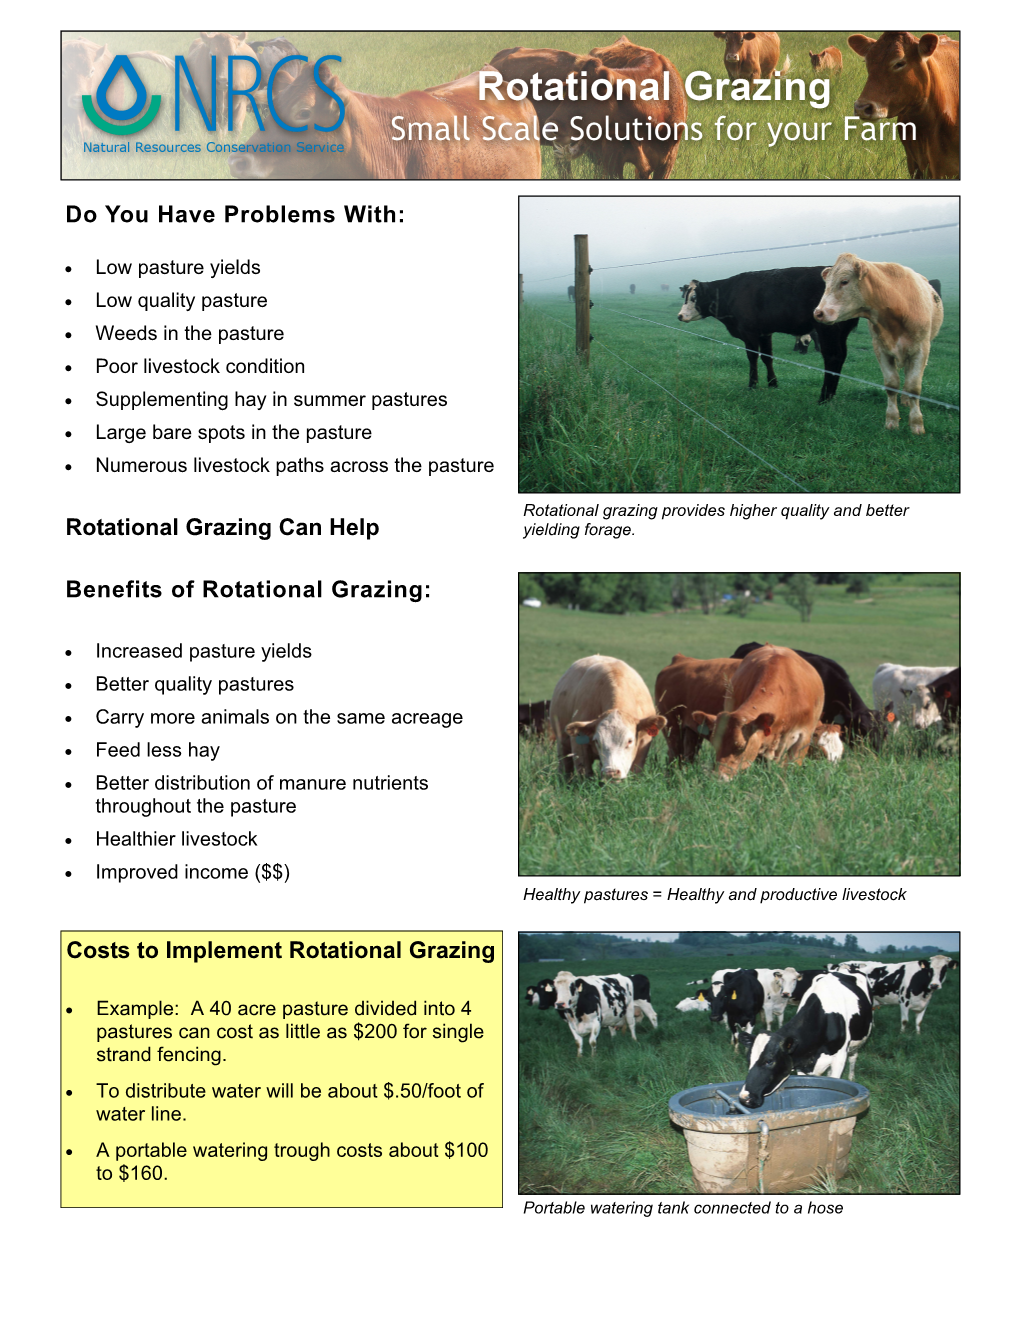 Costs to Implement Rotational Grazing